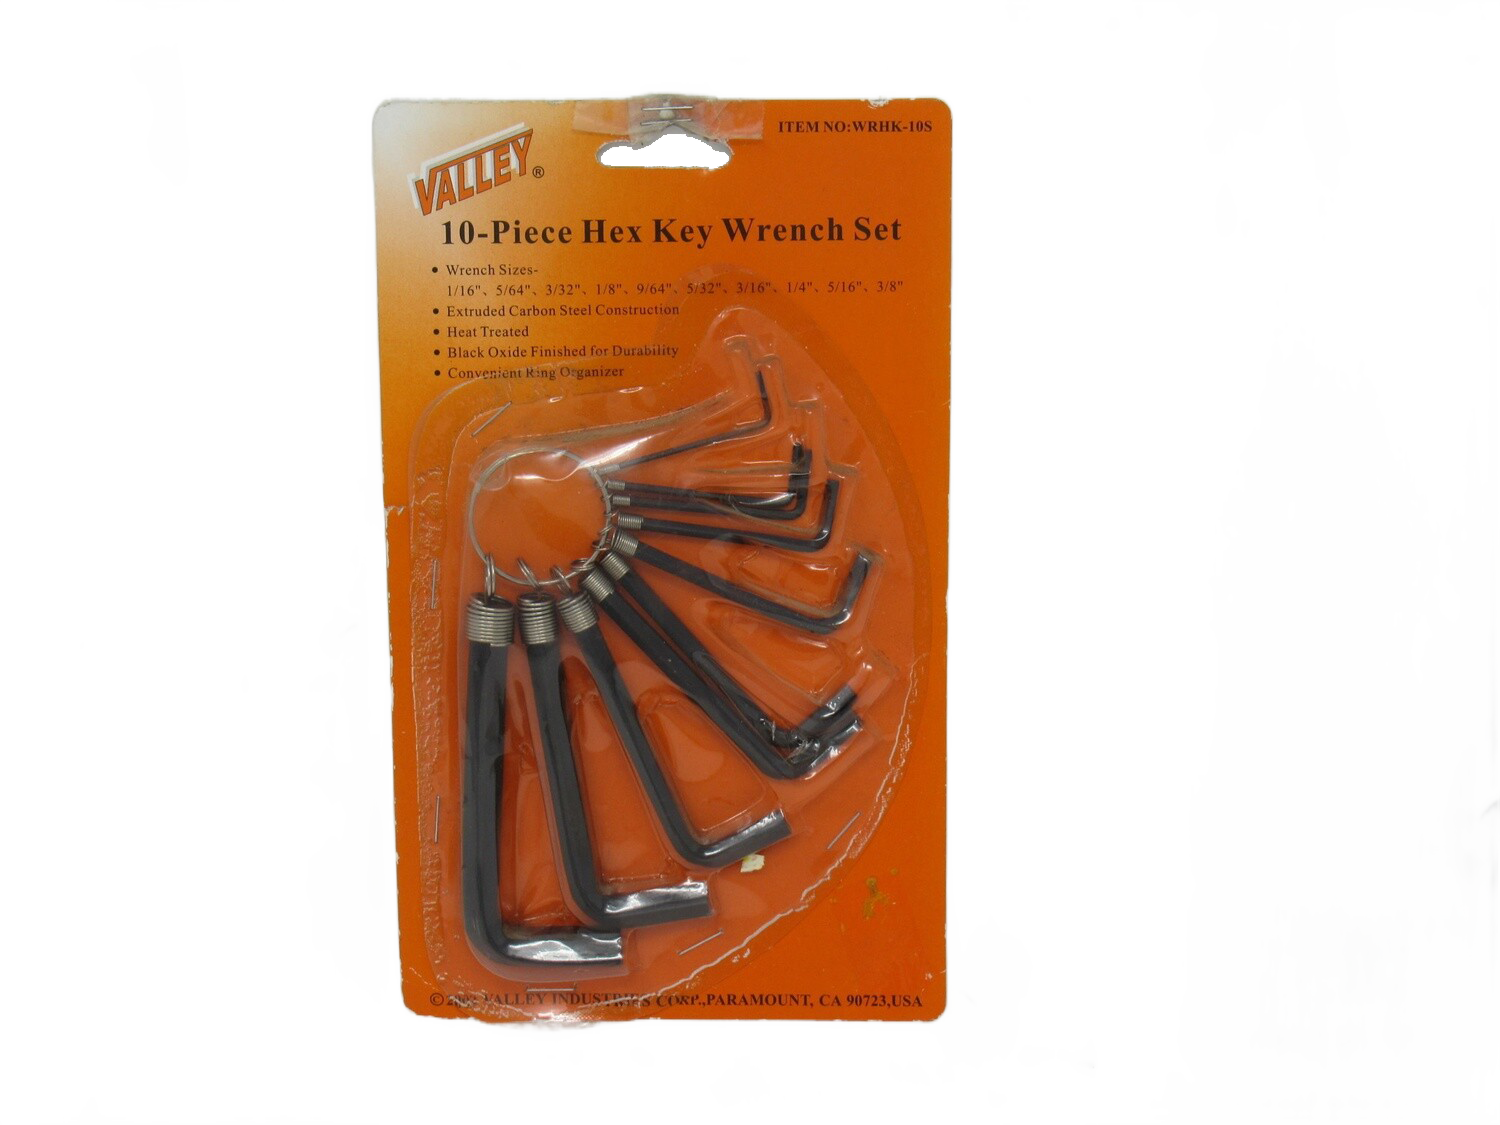 10 PC Hex Key 1/16 - 3/8 On Ring Wrench Set - Carded WRHK-10S